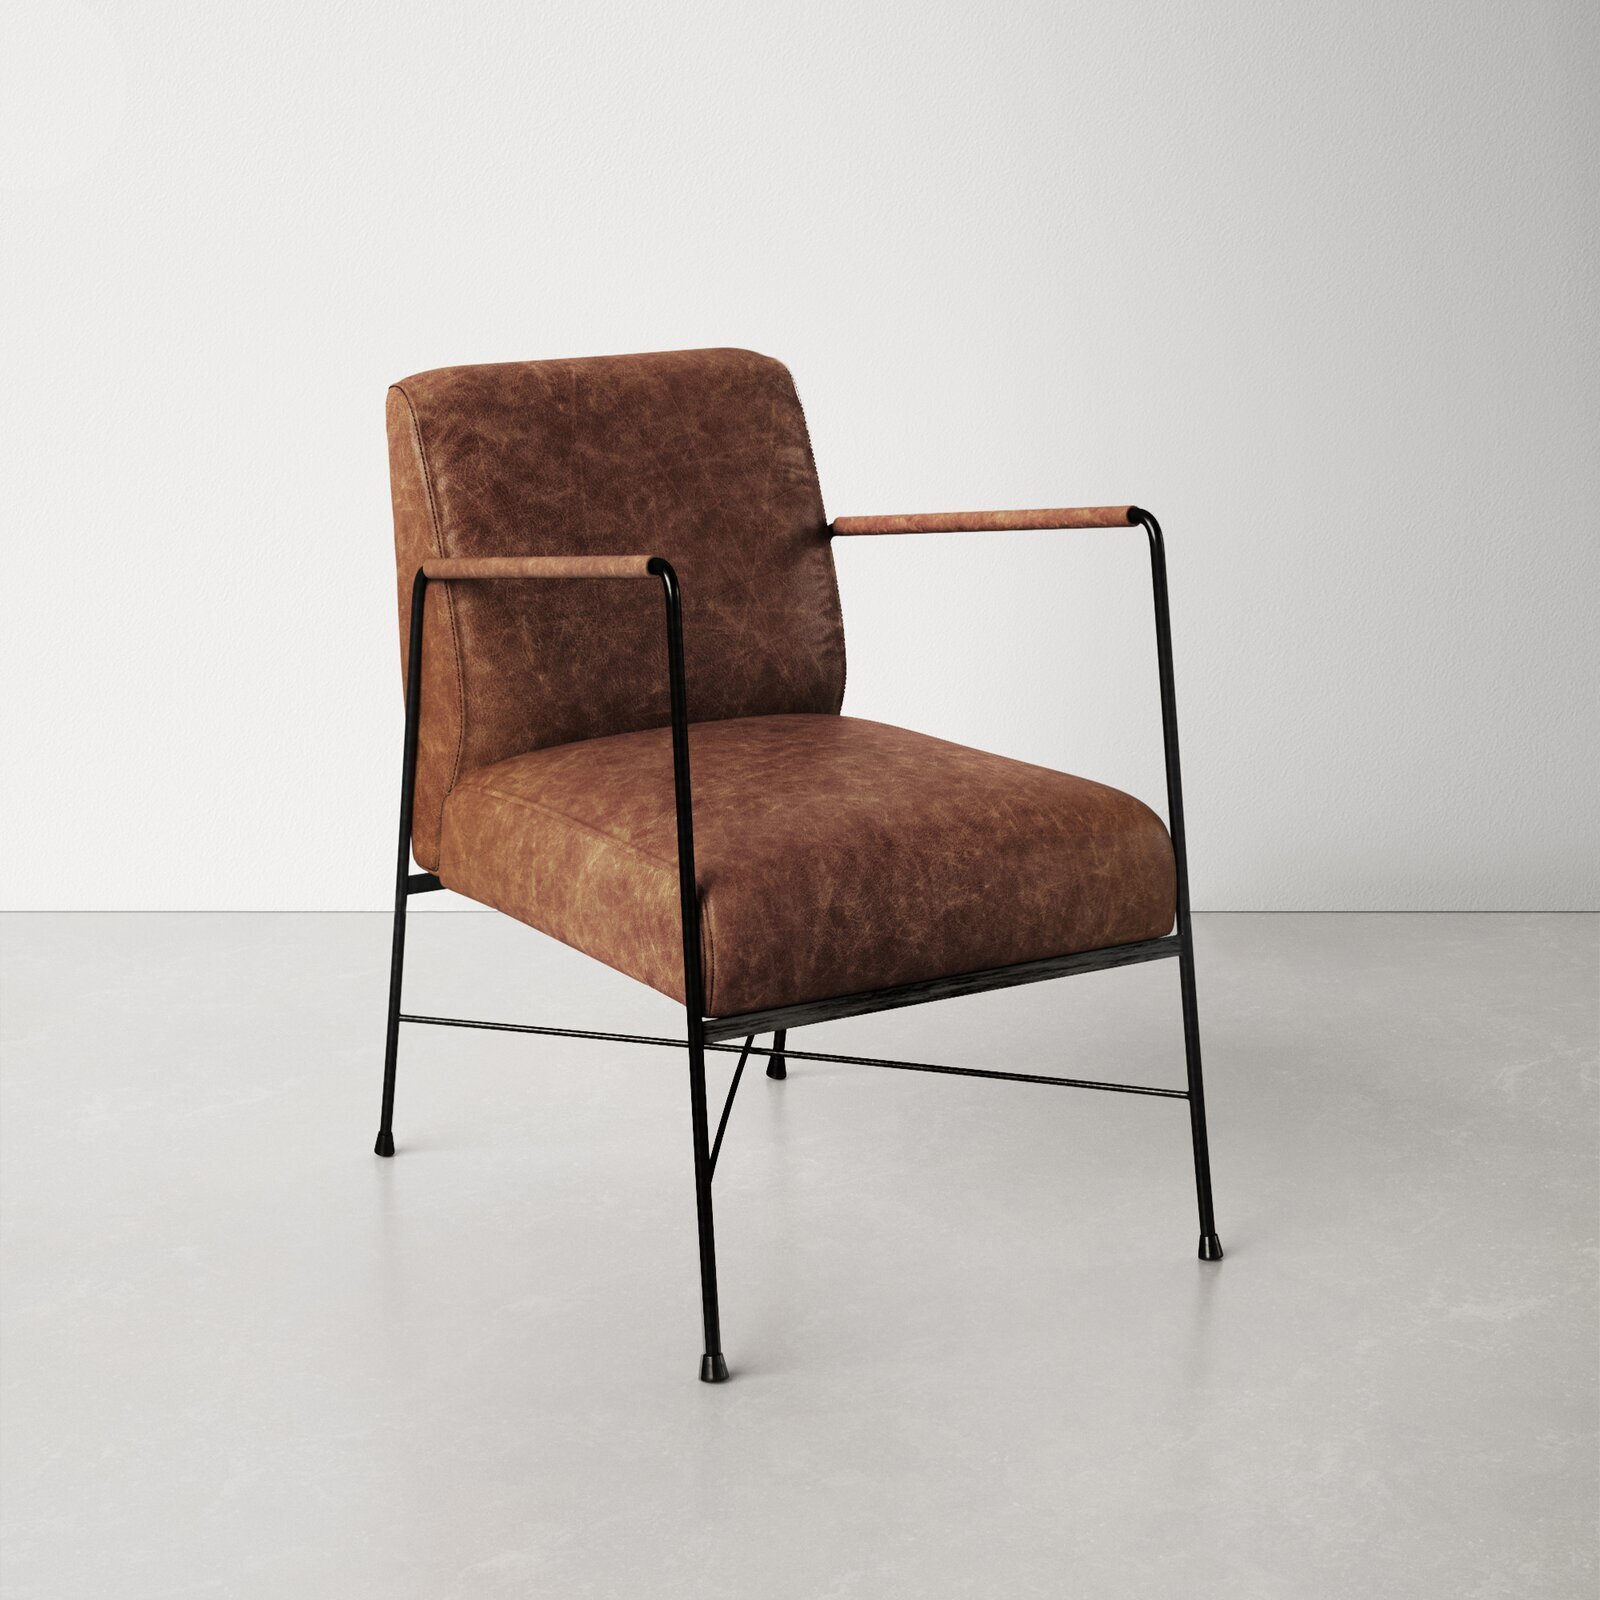 Industrial Minimalistic Metal and Leather Chair